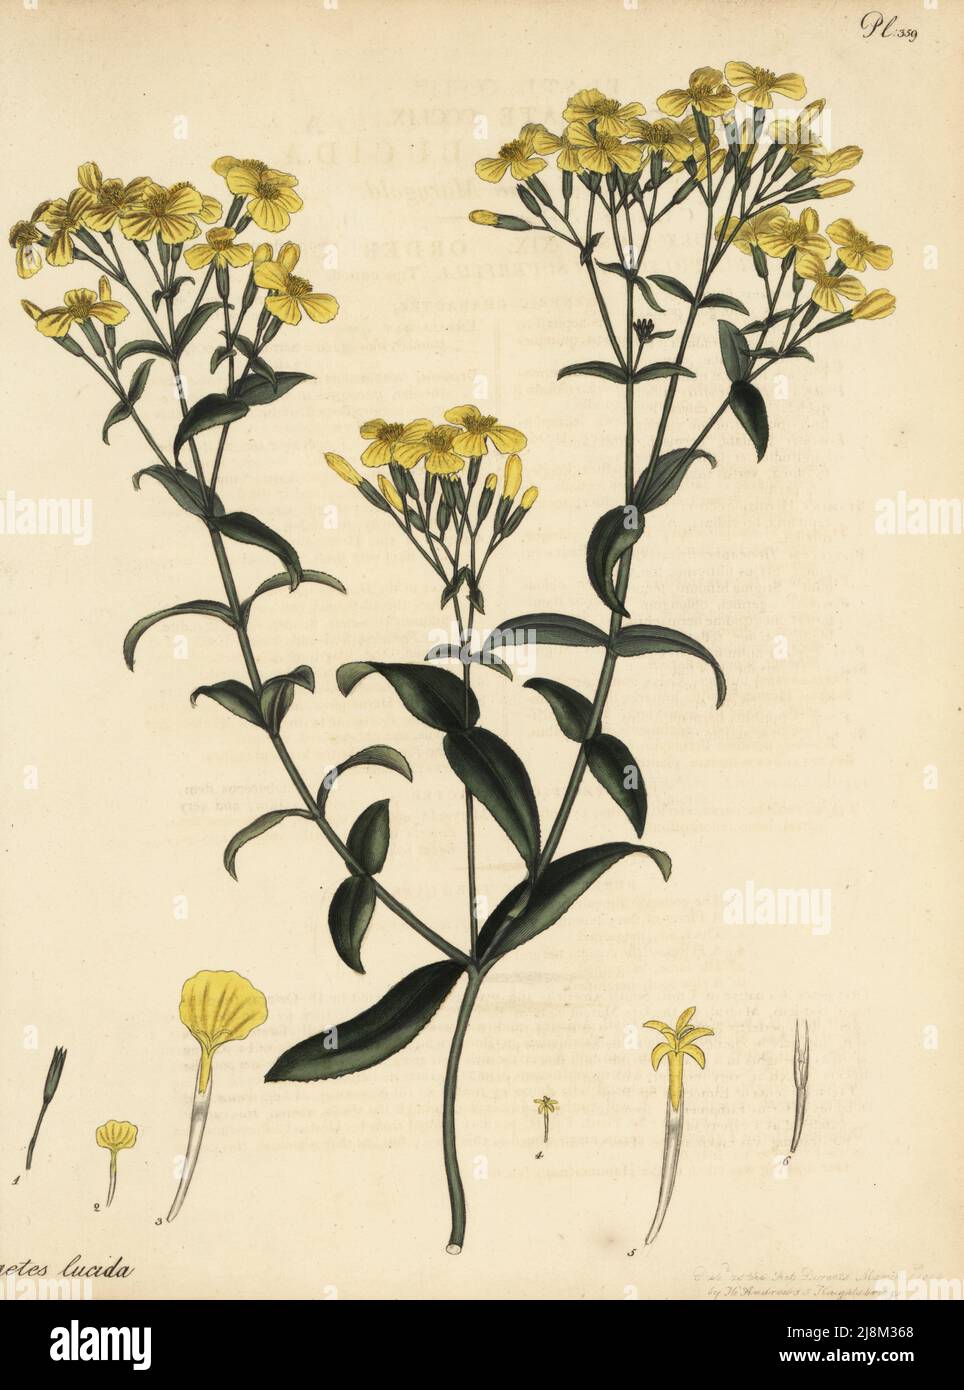 Mexican marigold, Tagetes lucida. Sweet Chili Marygold. Native of Chile, South America, in the Hammersmith Nursery of Lee and Kennedy. Copperplate engraving drawn, engraved and hand-coloured by Henry Andrews from his Botanical Register, Volume 5, self-published in Knightsbridge, London, 1804. Stock Photo